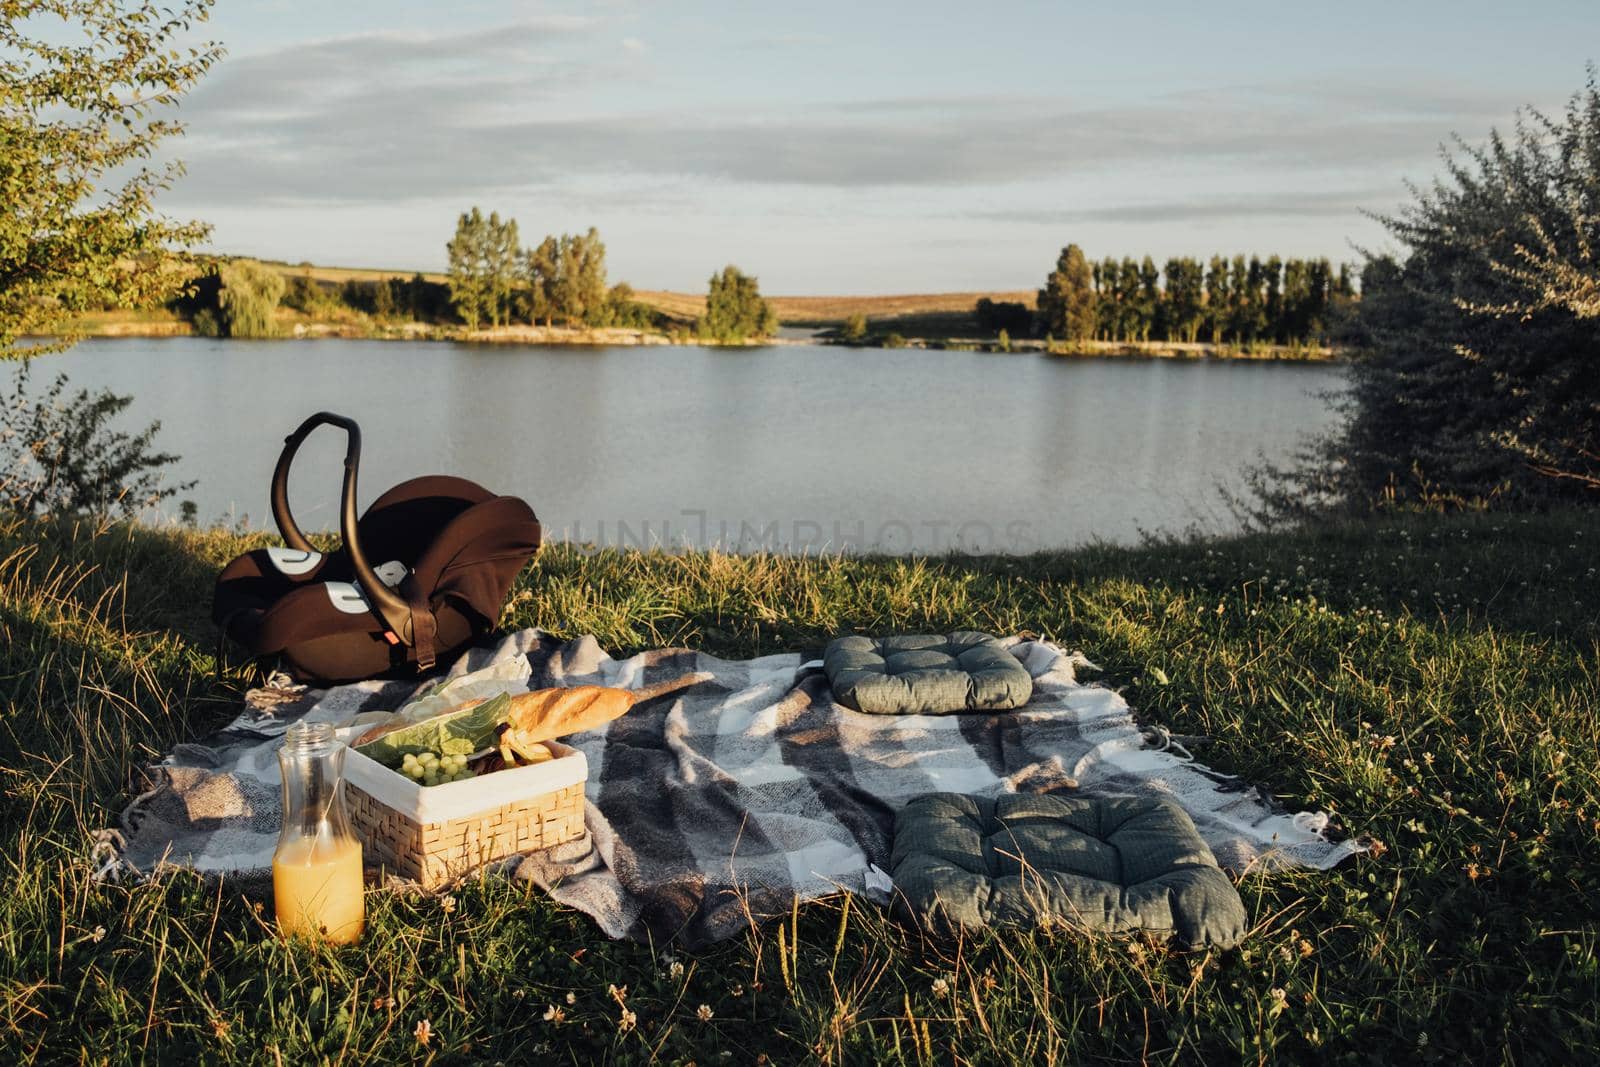 Picnic Set Outdoors by the Lake at Sunset, Child Car Seat, Fruit Basket and Bottle of Juice on Plaid by Romvy